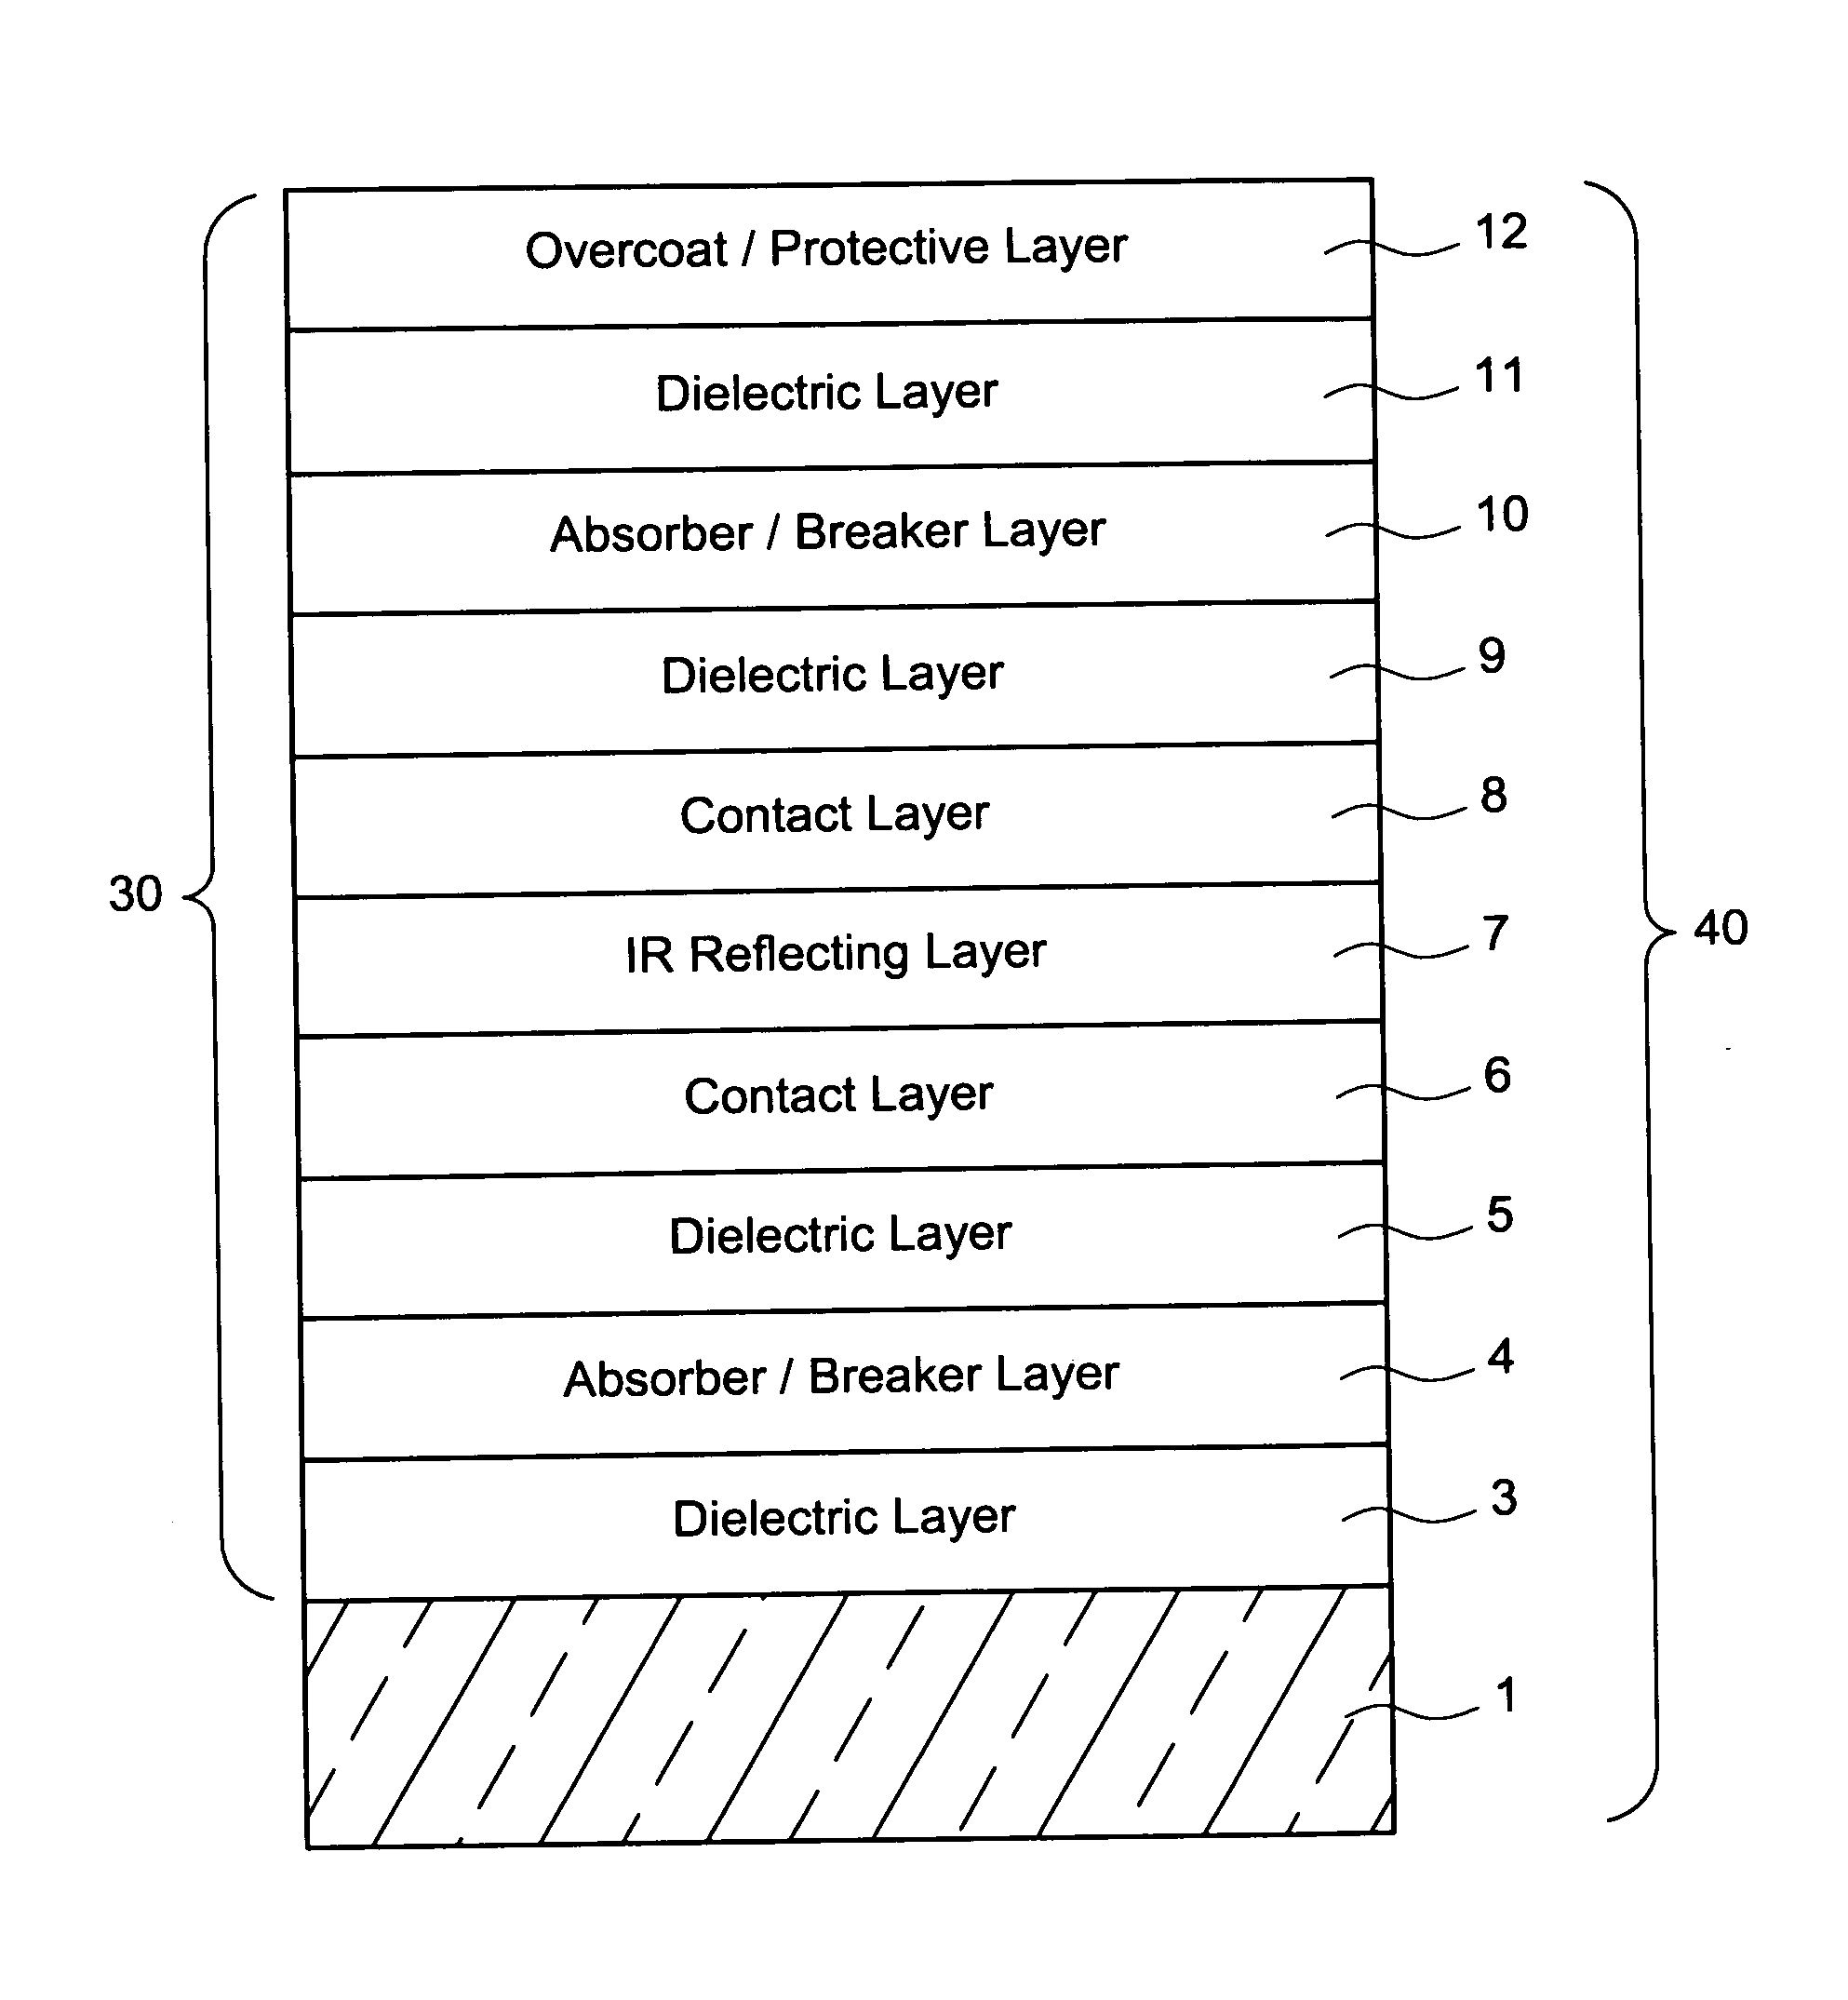 Coated article having low-E coating with absorber layer(s)